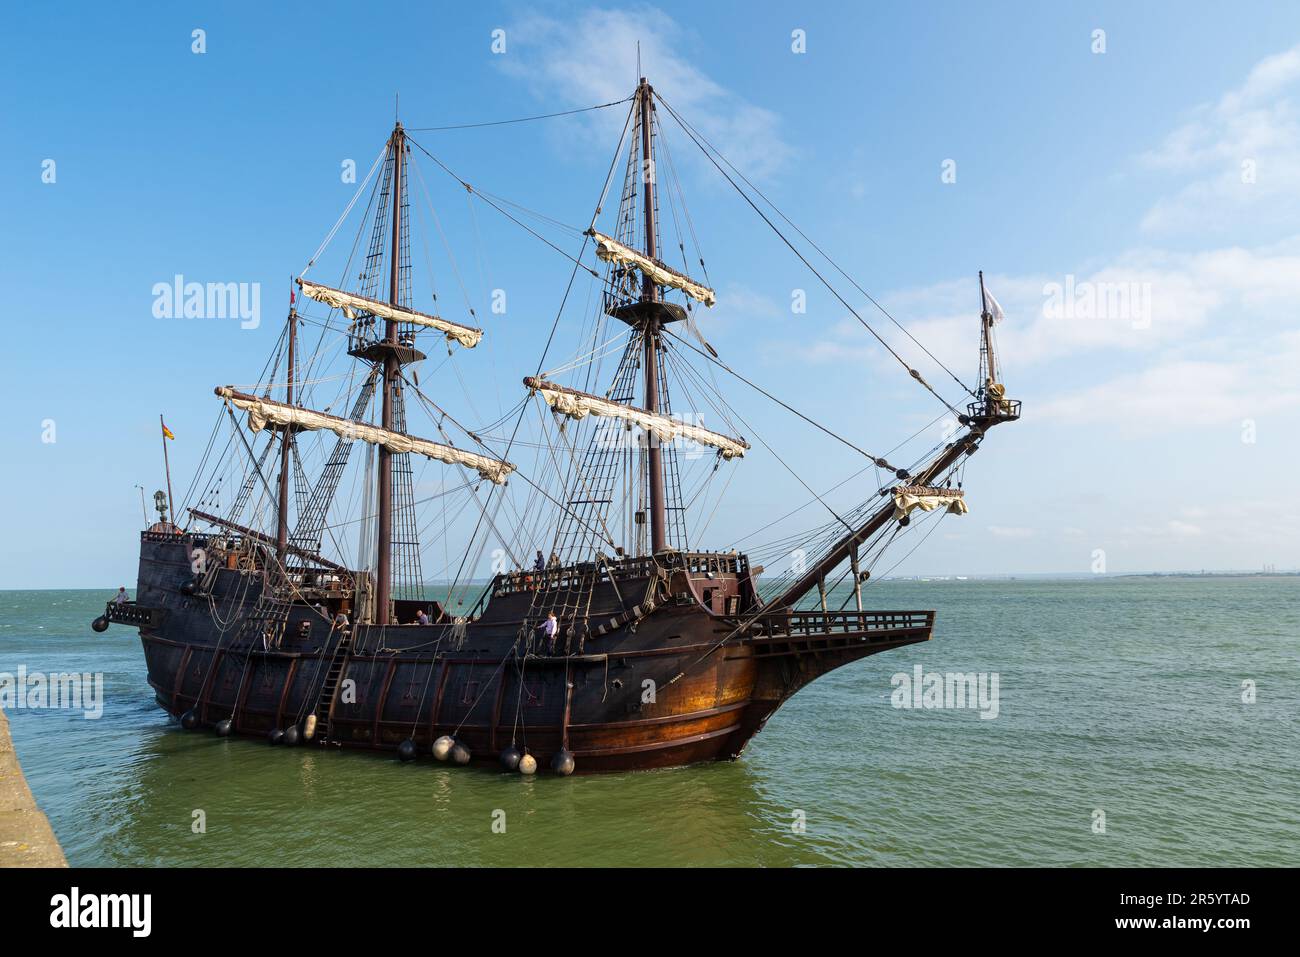 Replica 17th century Spanish galleon leaving Southend Pier, Southend on Sea, Essex, UK. Moving out into the Thames Estuary Stock Photo